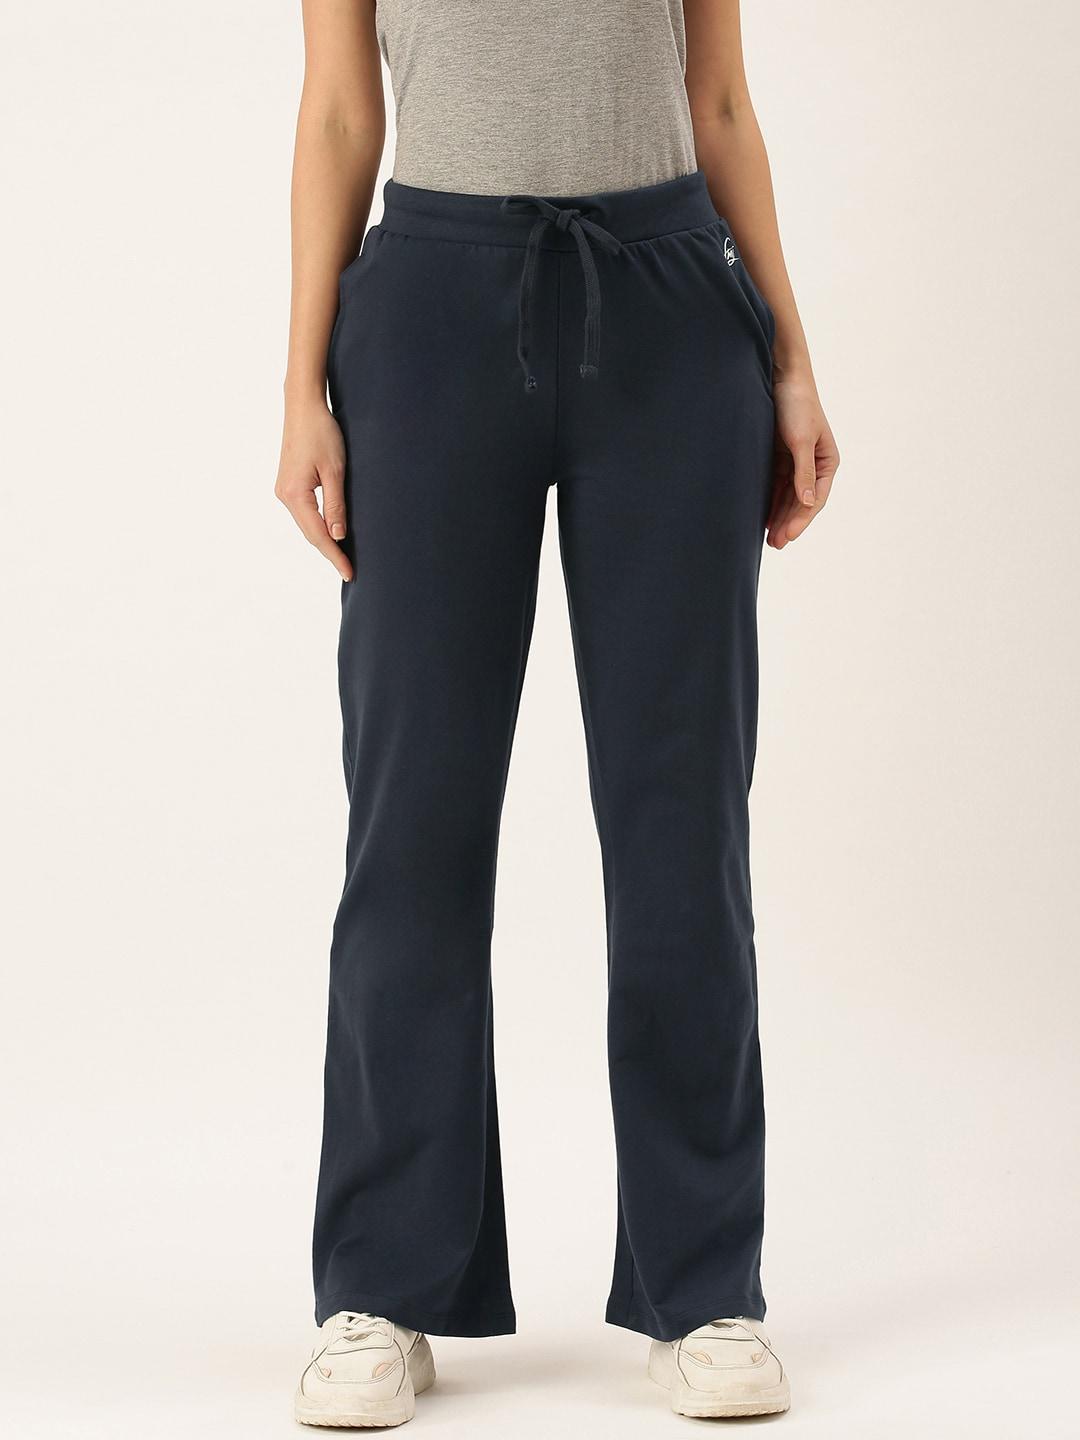 flying-machine-womens-navy-solid-regular-track-pant